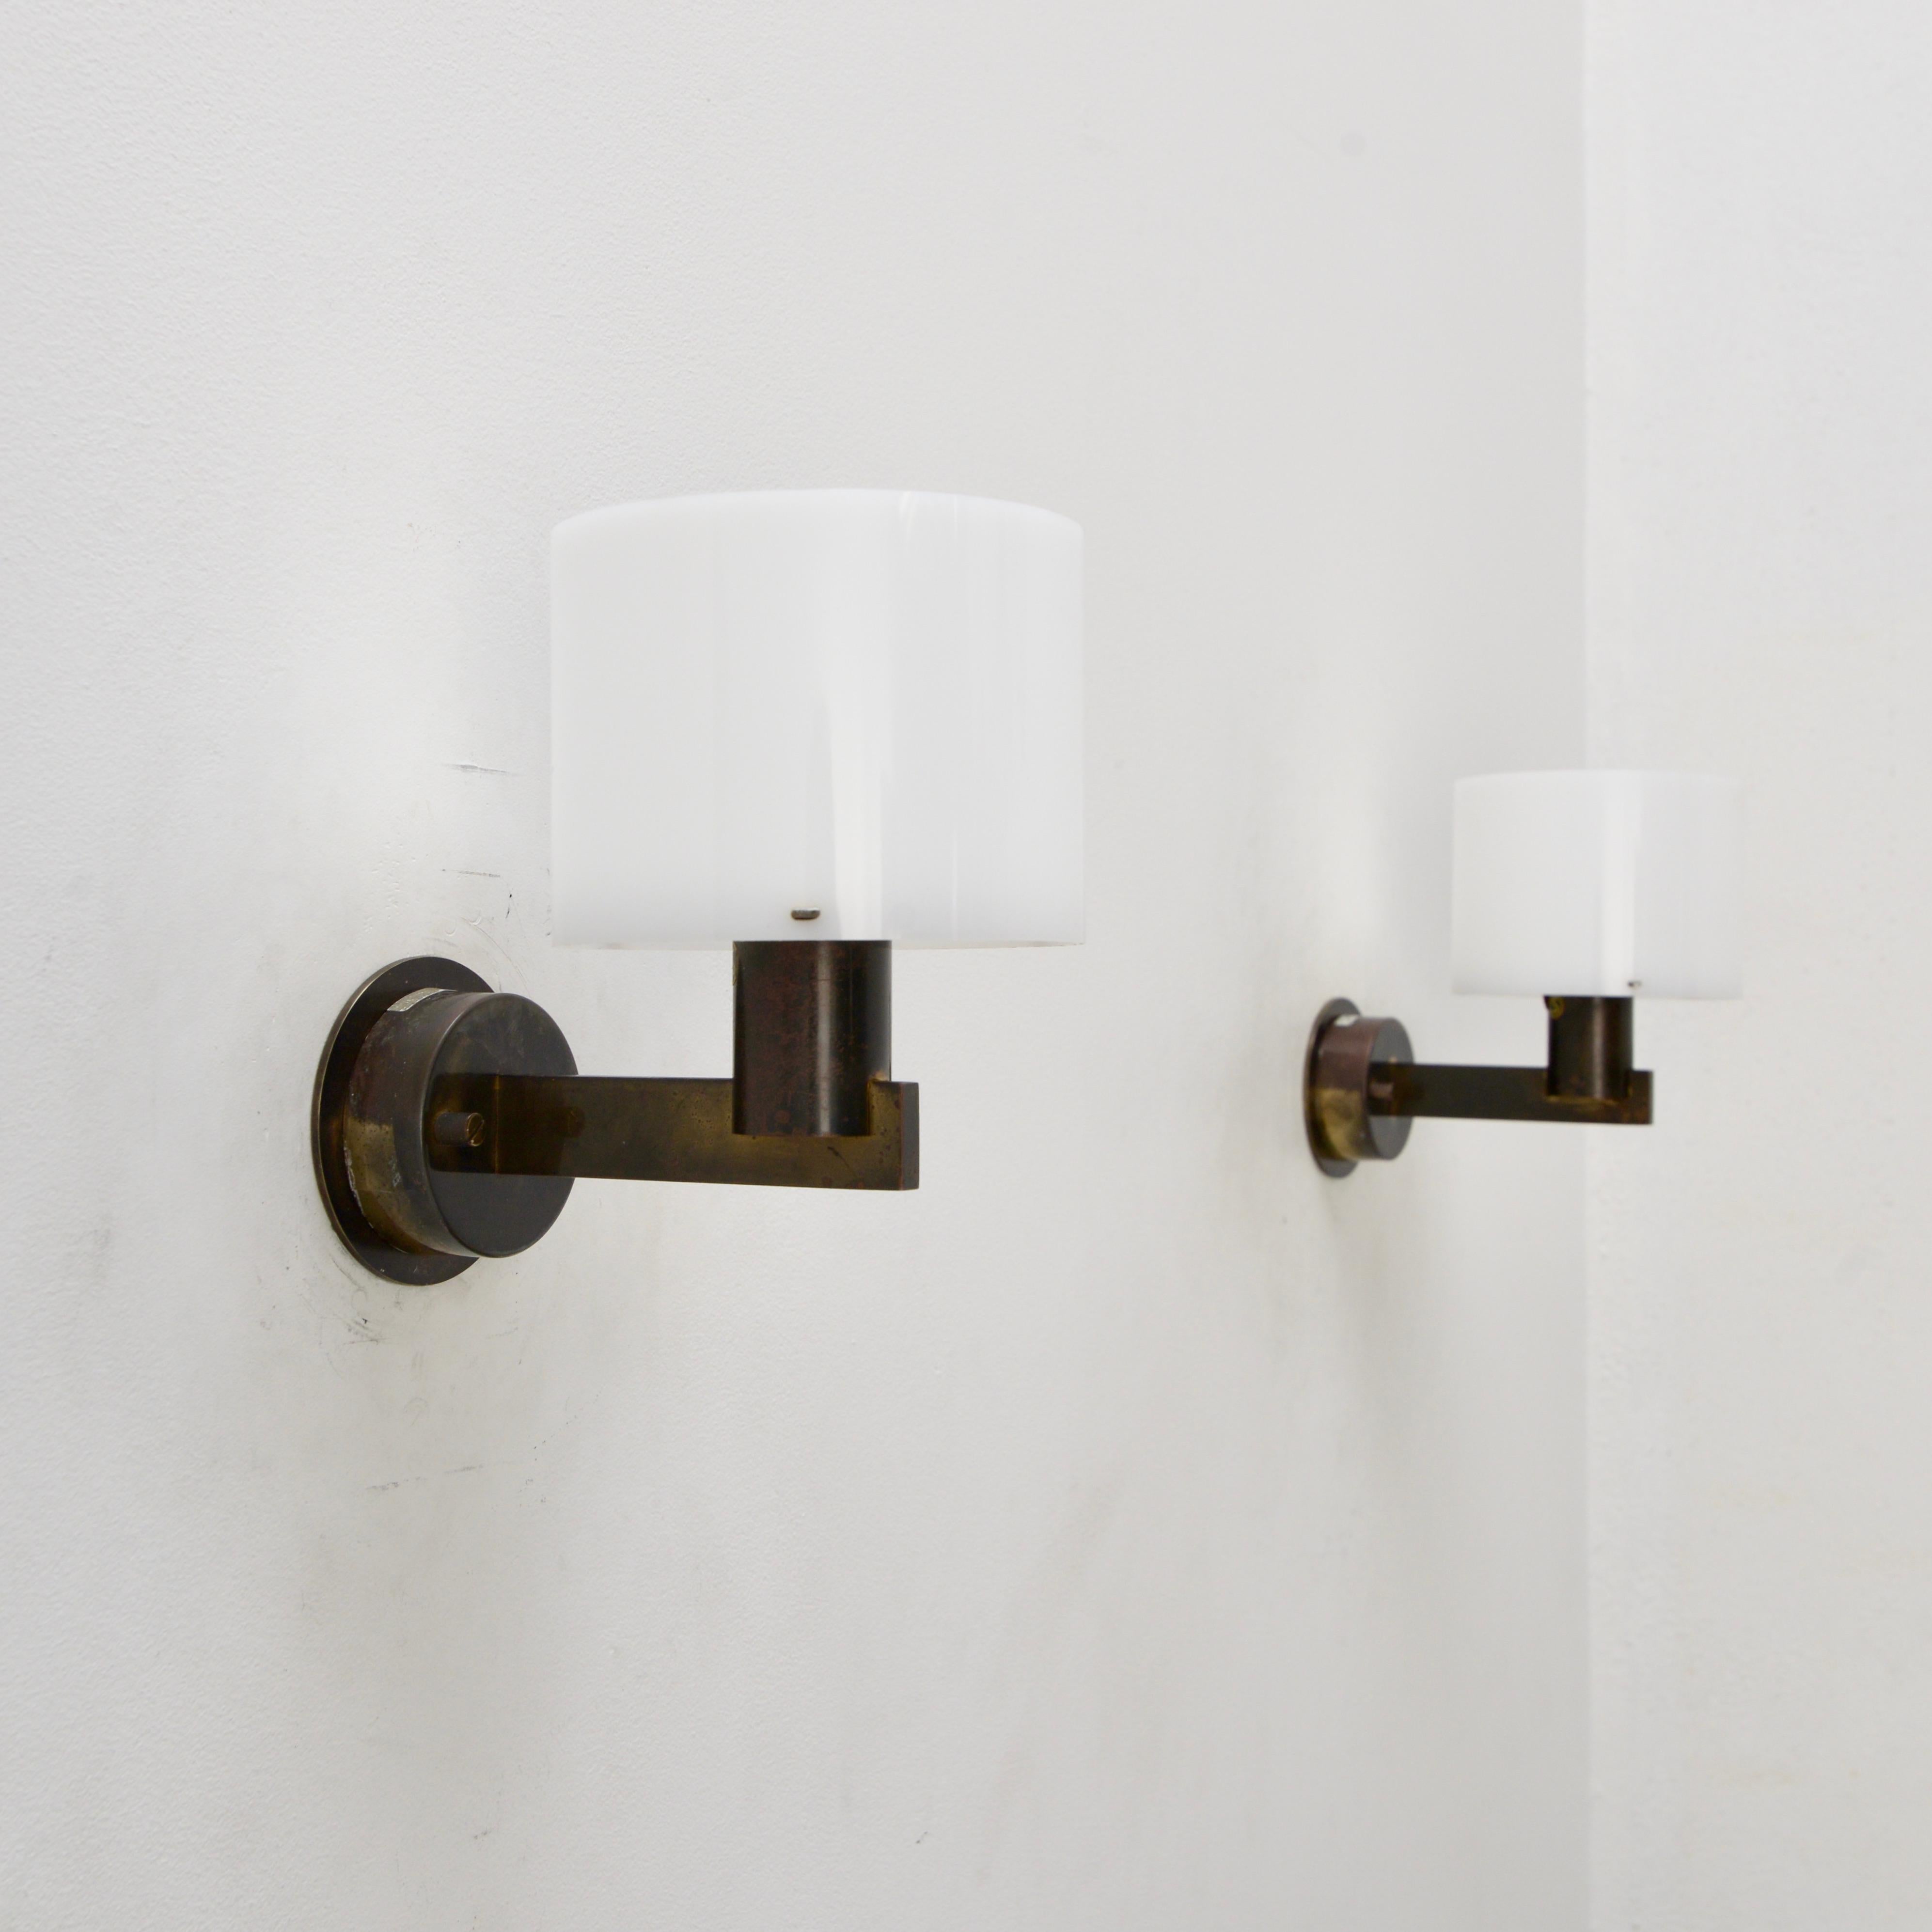 Pair of vintage Hans-Agne Jakobsson sconces in steel, brass and acrylic. They are wired with a single E26 socket in each sconce and are for use in the US. But can be wired for use anywhere in the world. Lightbulb included with